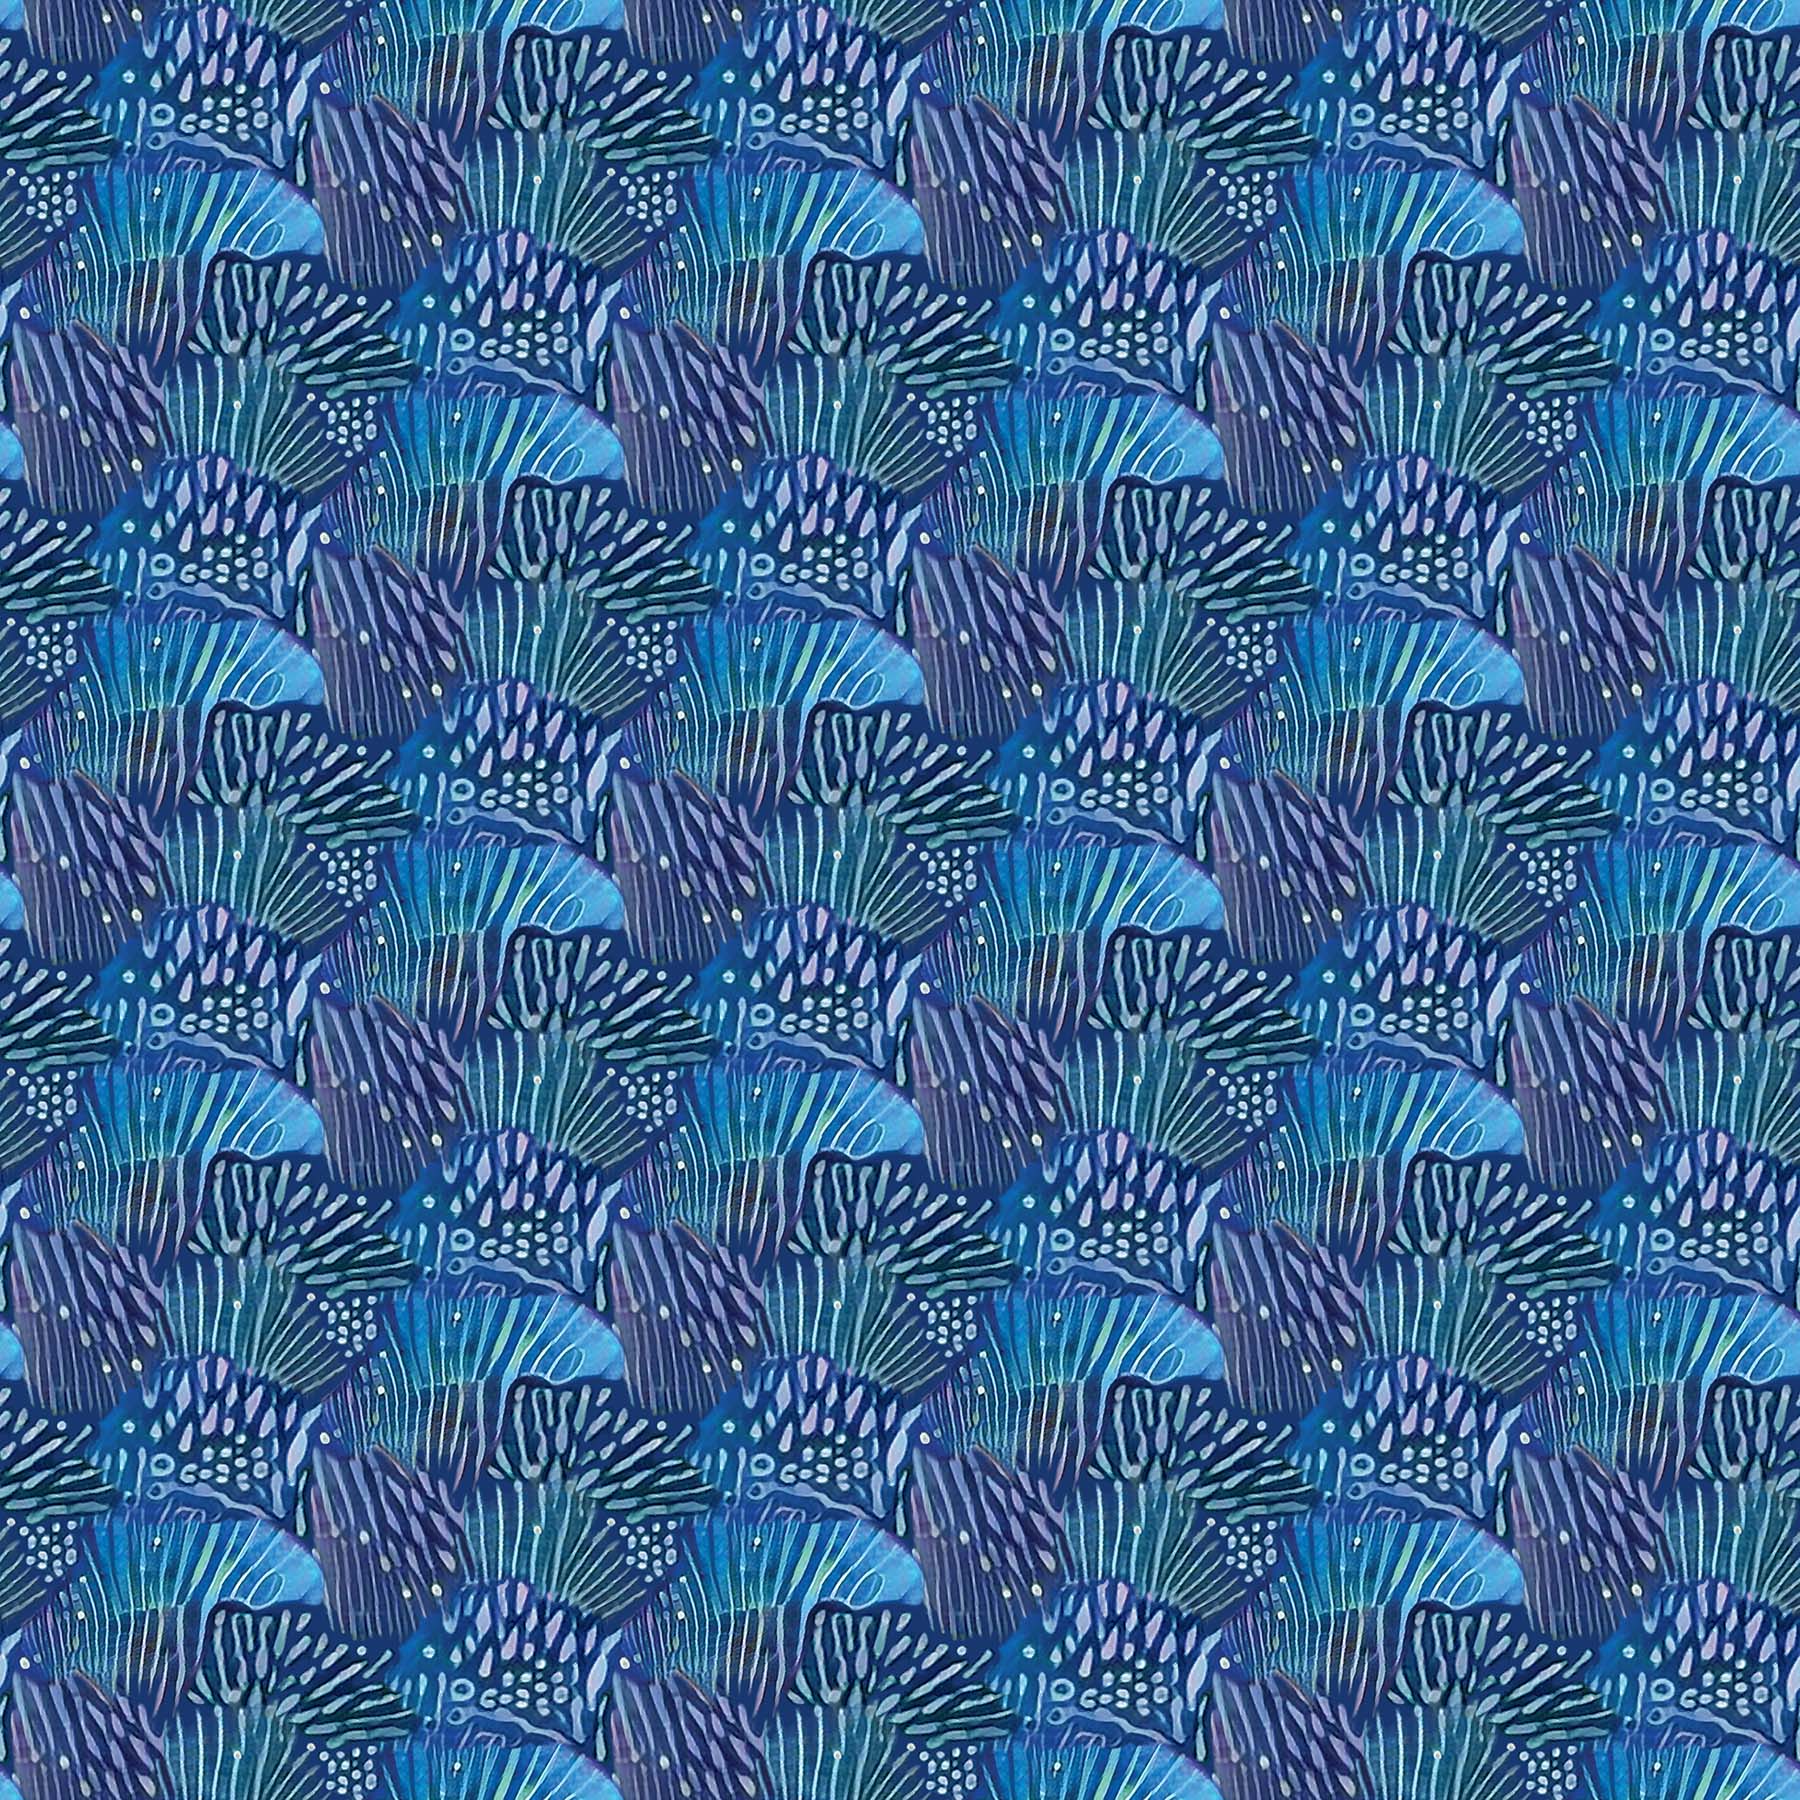 Muse Scallop Print Cotton Fabric by Northcott DP23197-46